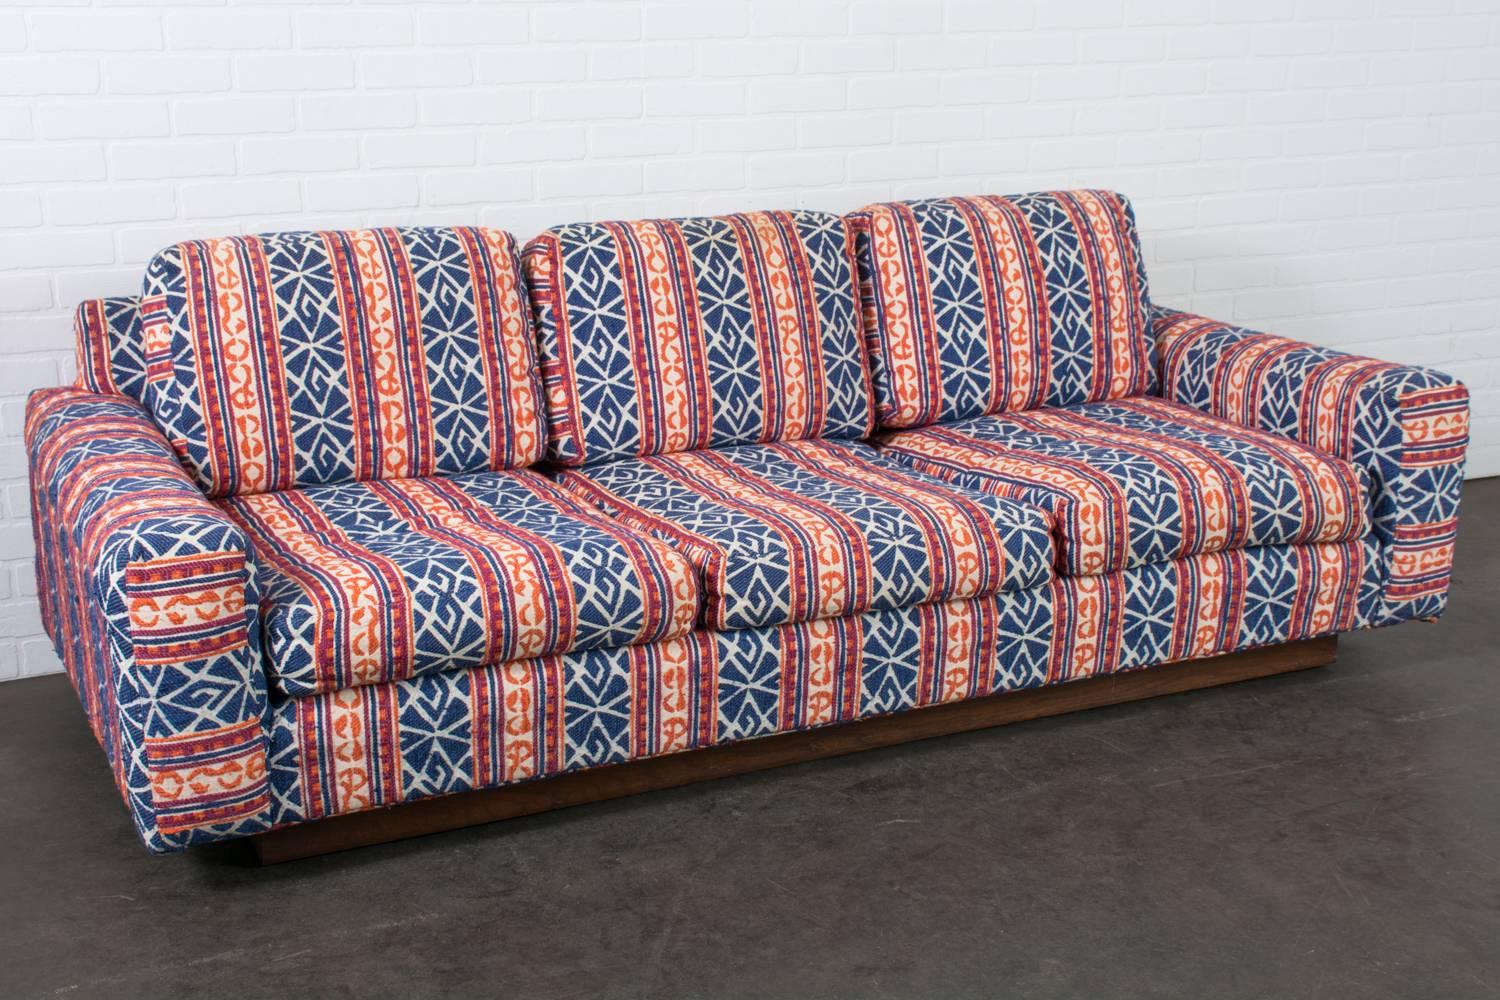 This low Mid-Century Modern sofa has a wood base with a walnut finish and is upholstered in a vintage fabric with shades of blue, orange, deep fuschia, and off-white, circa 1970s. This is the perfect vintage sofa for a modern Bohemian living room.